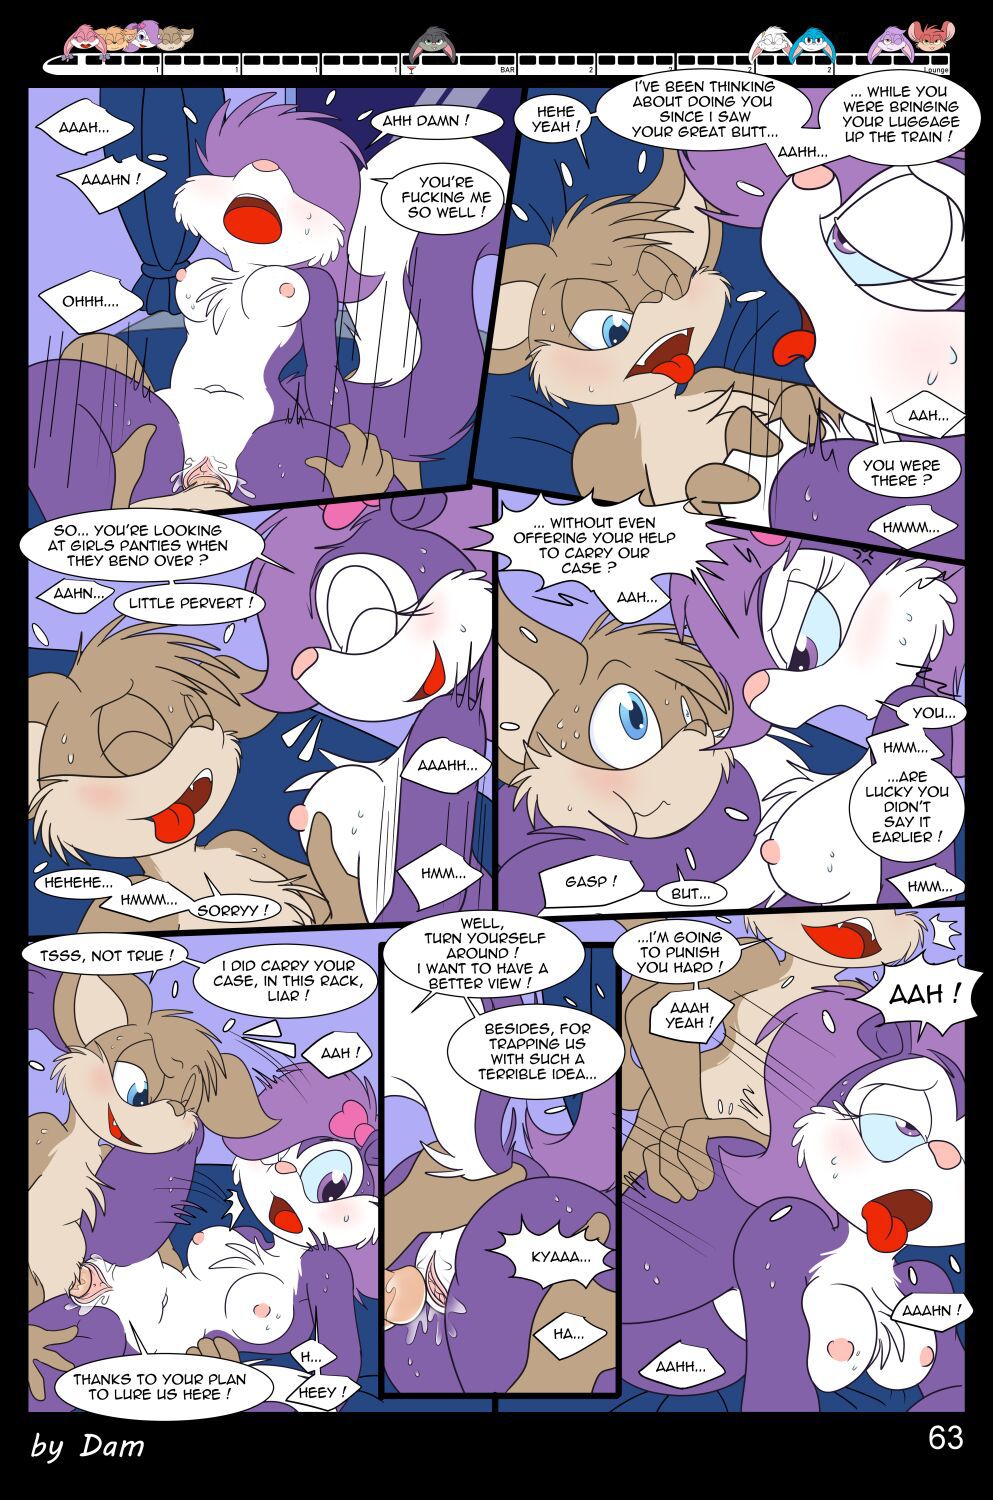 [Dam] Toons on a train [Ongoing] 63